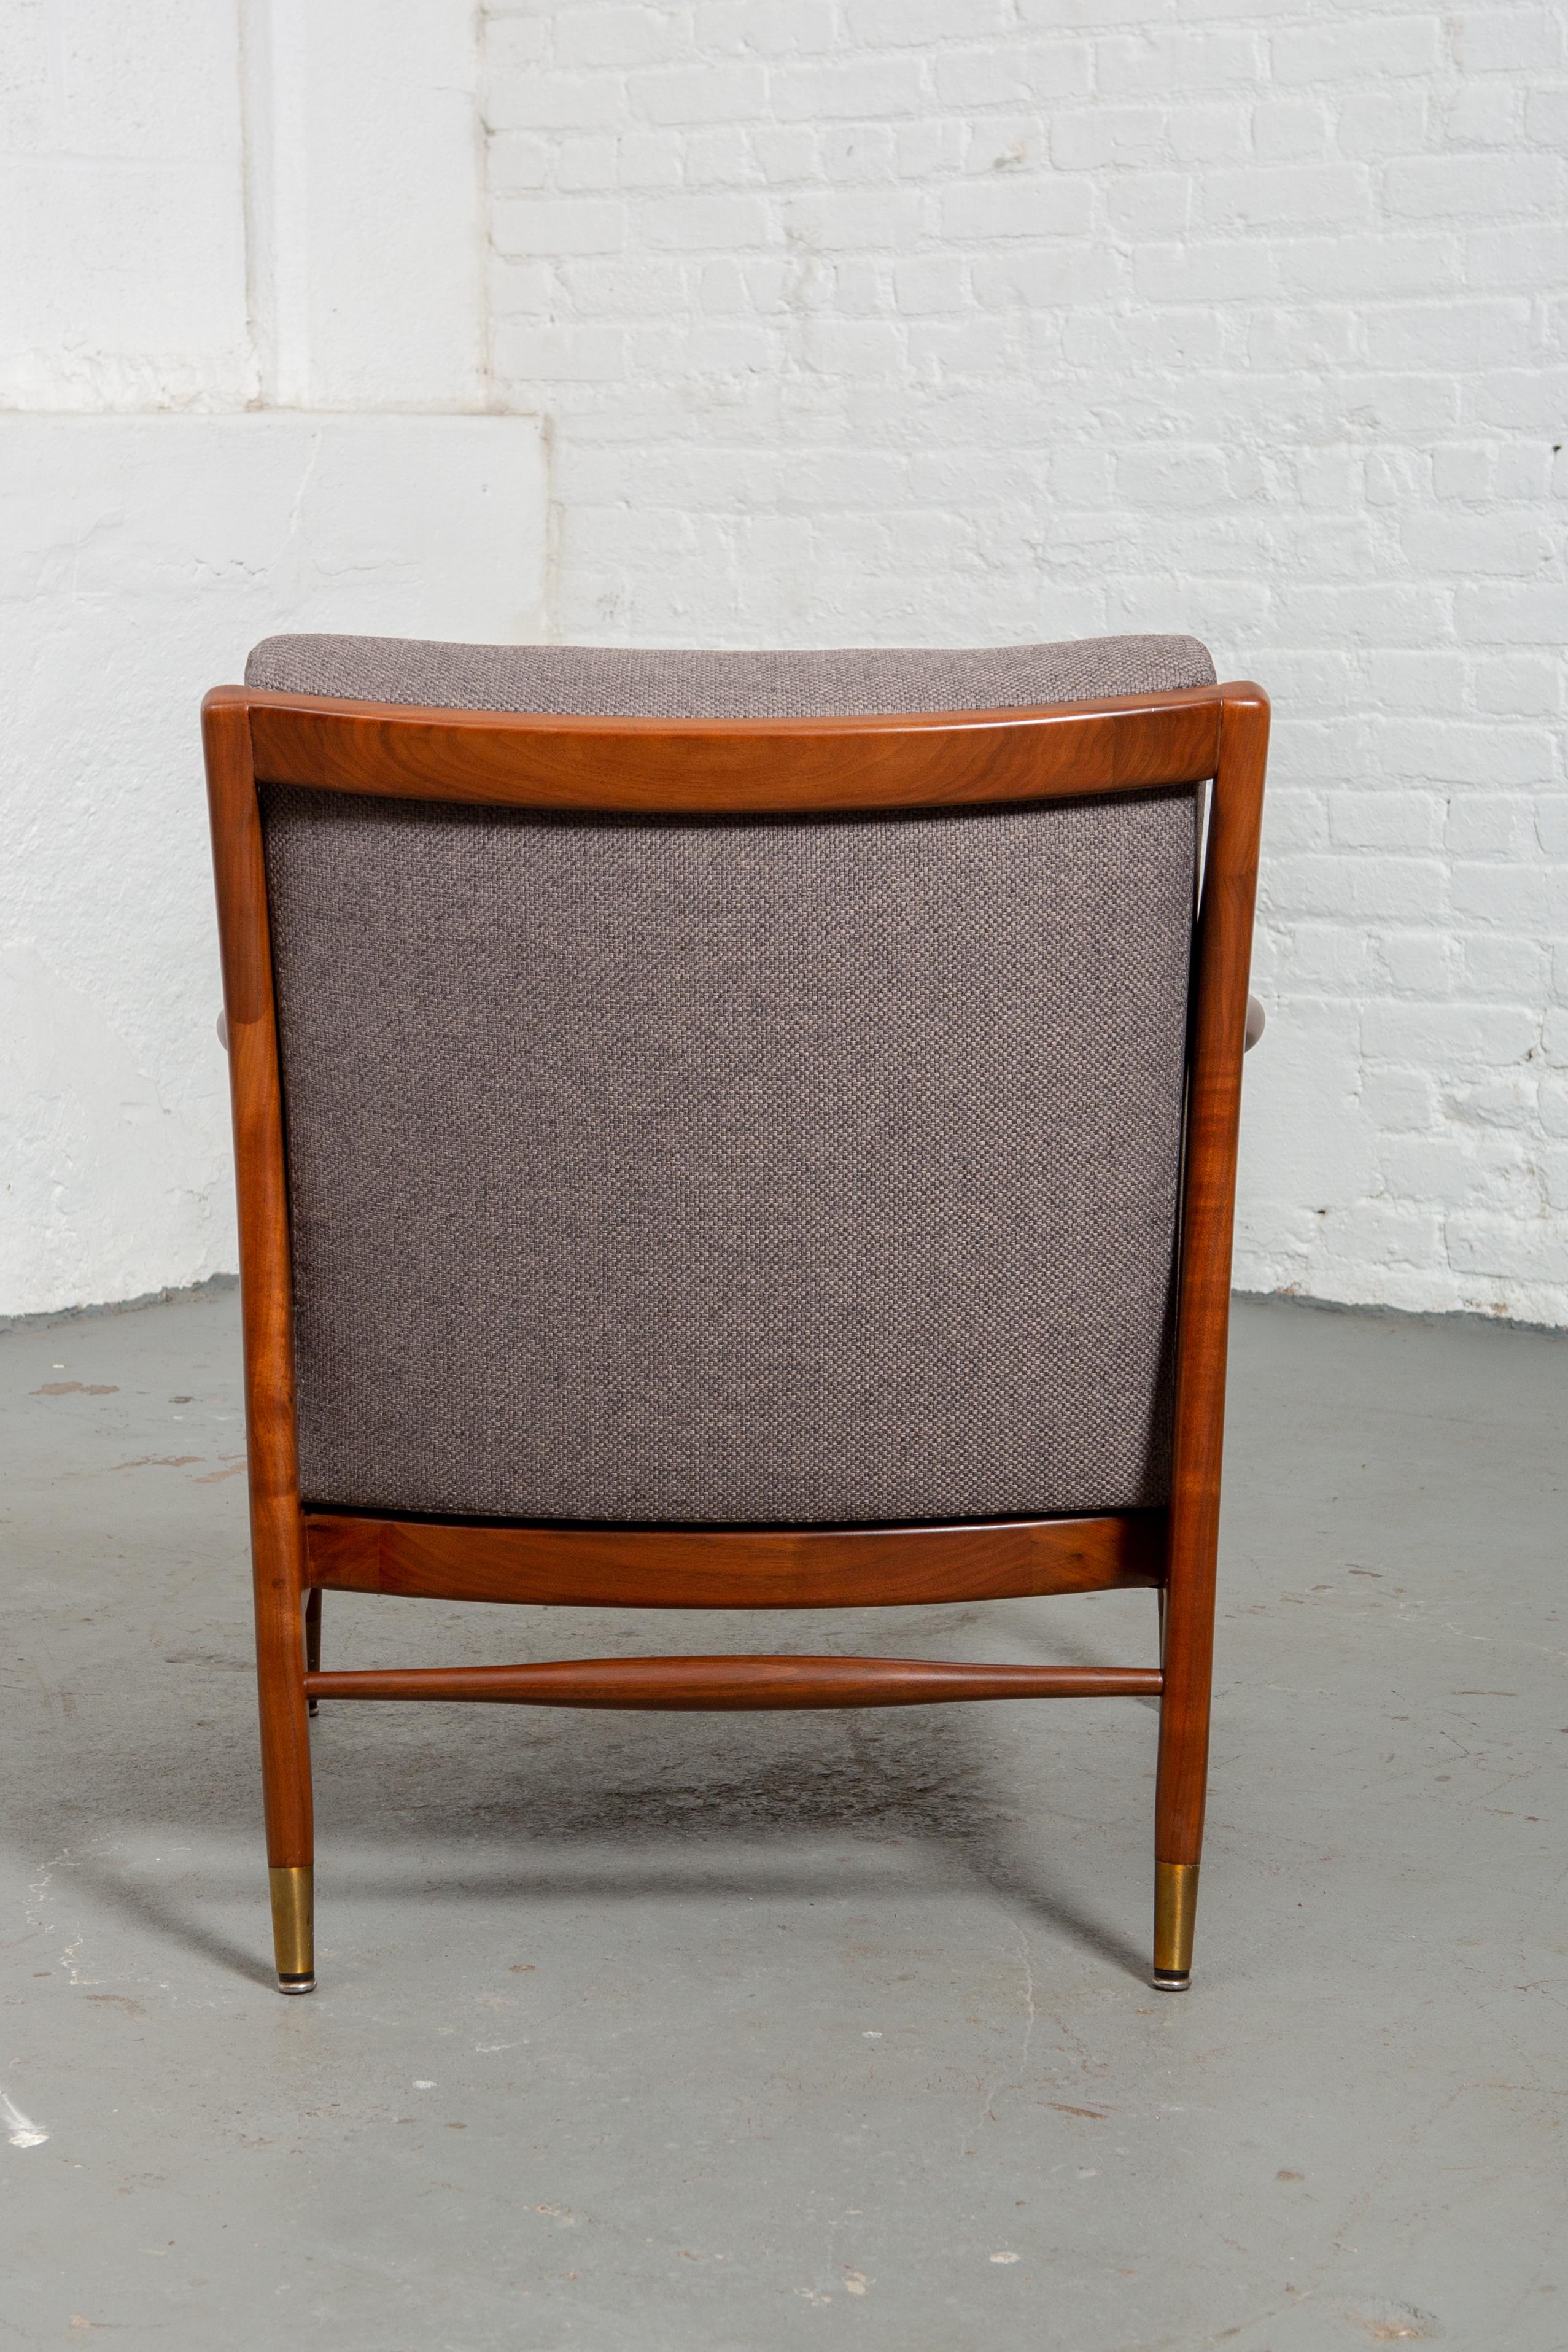 Restored American Midcentury Armchair with Brass Accents 1